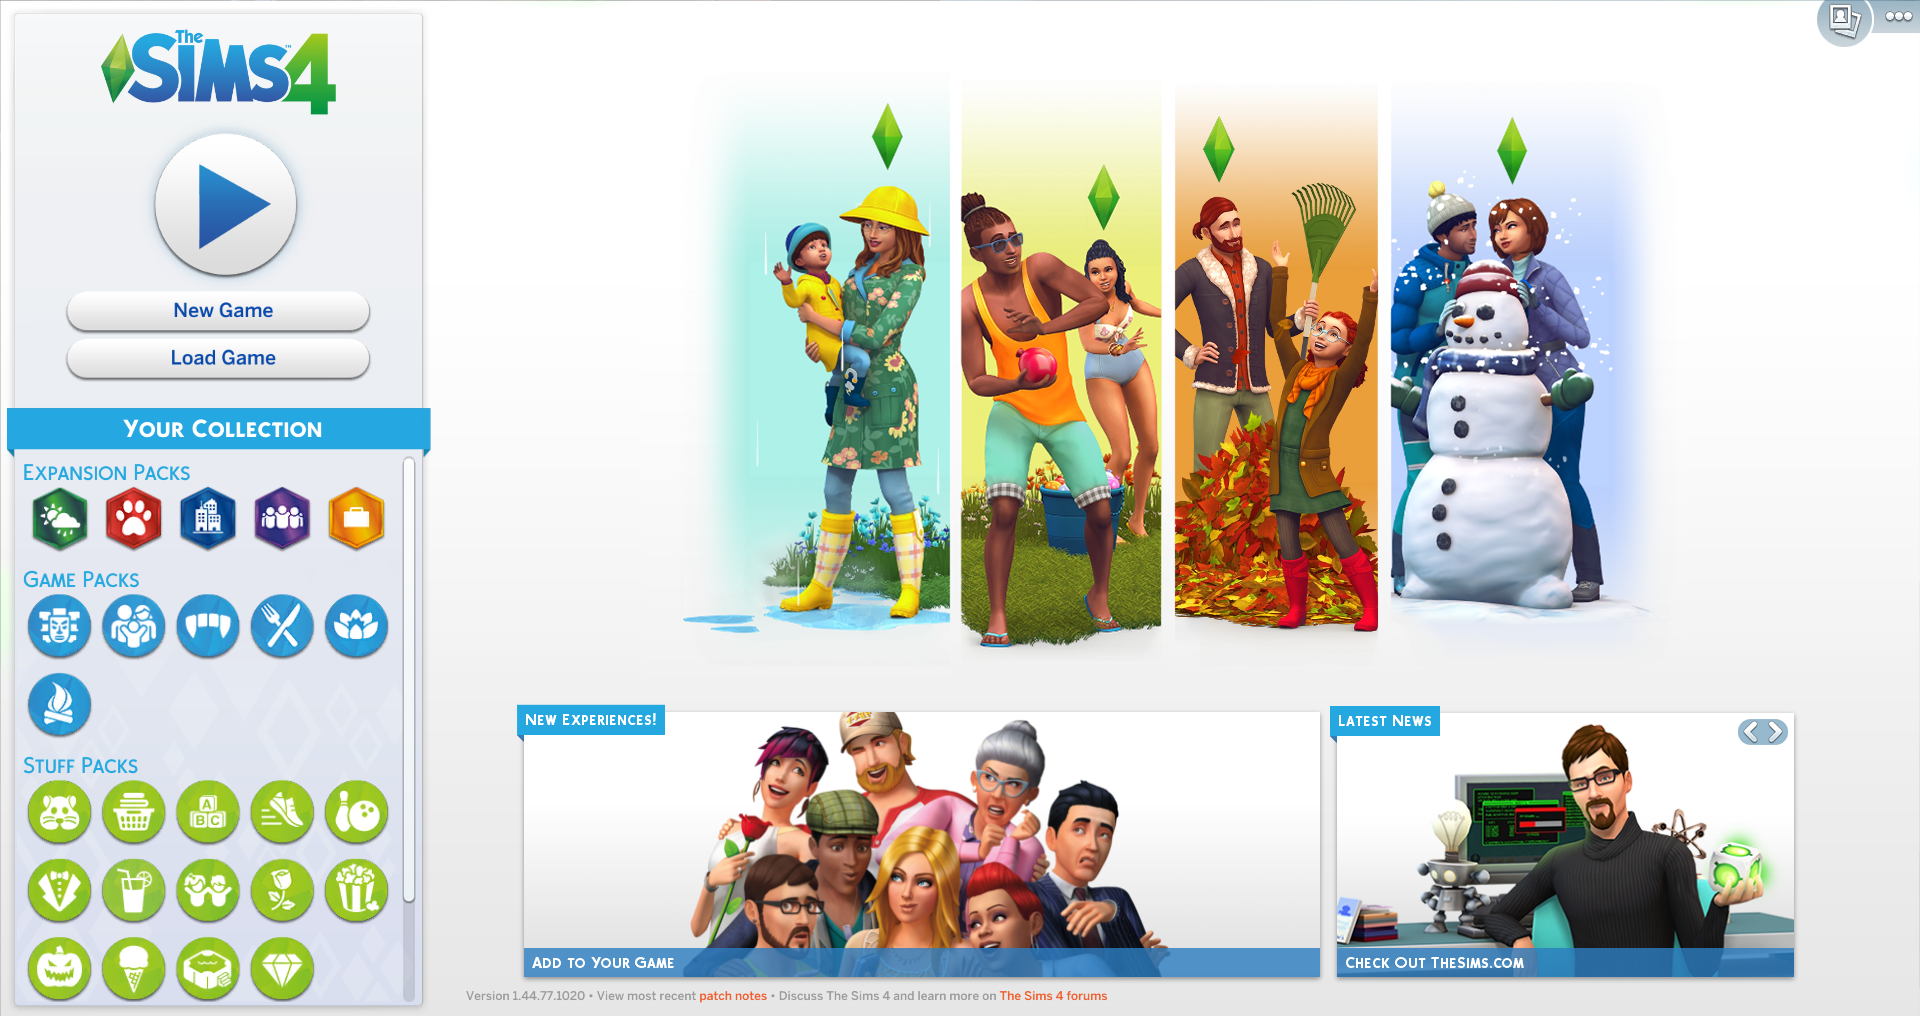 launch the sims 4 offline